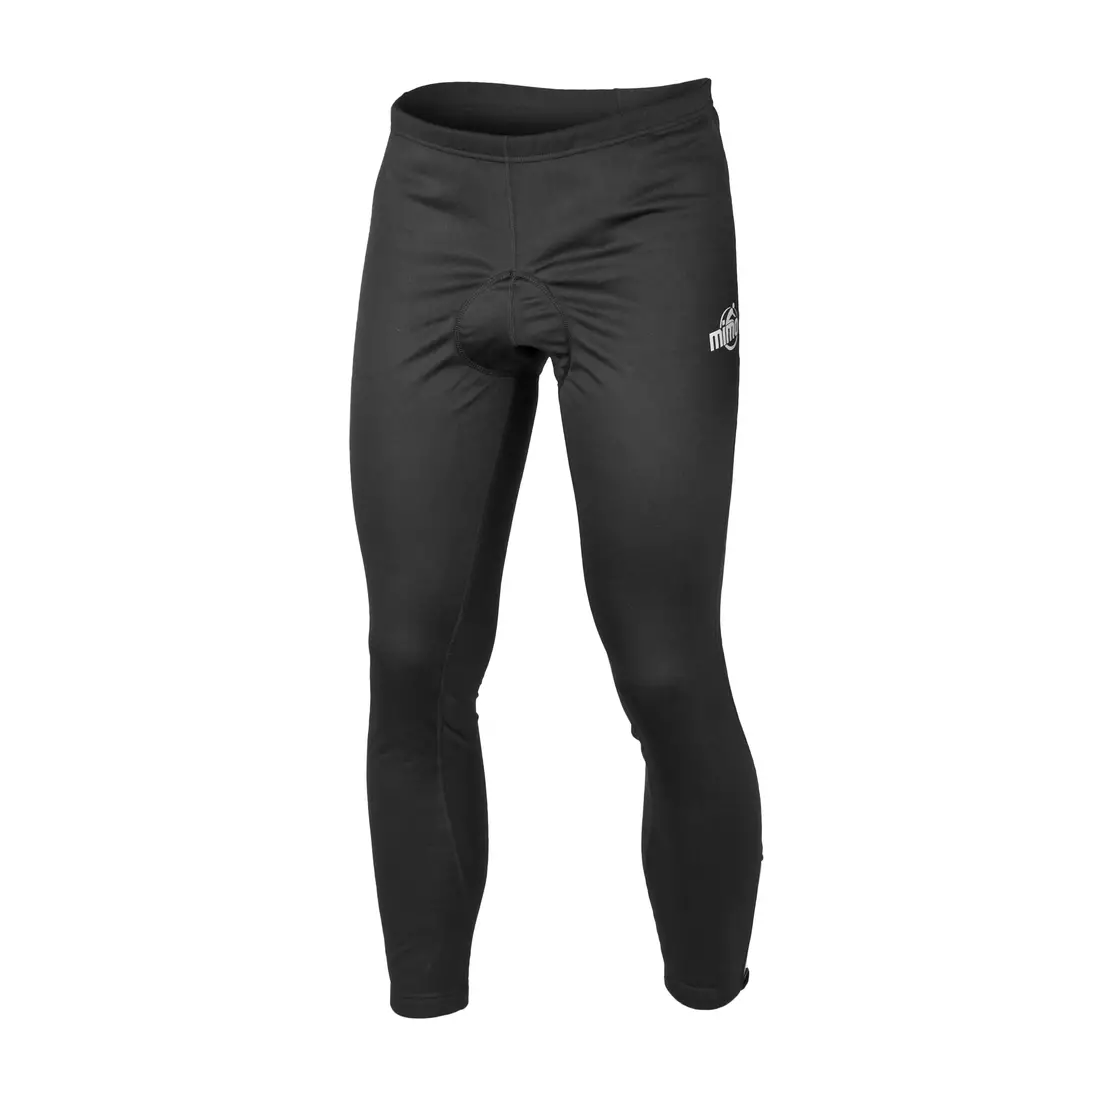 MikeSPORT BLAKE - insulated cycling pants, softshell